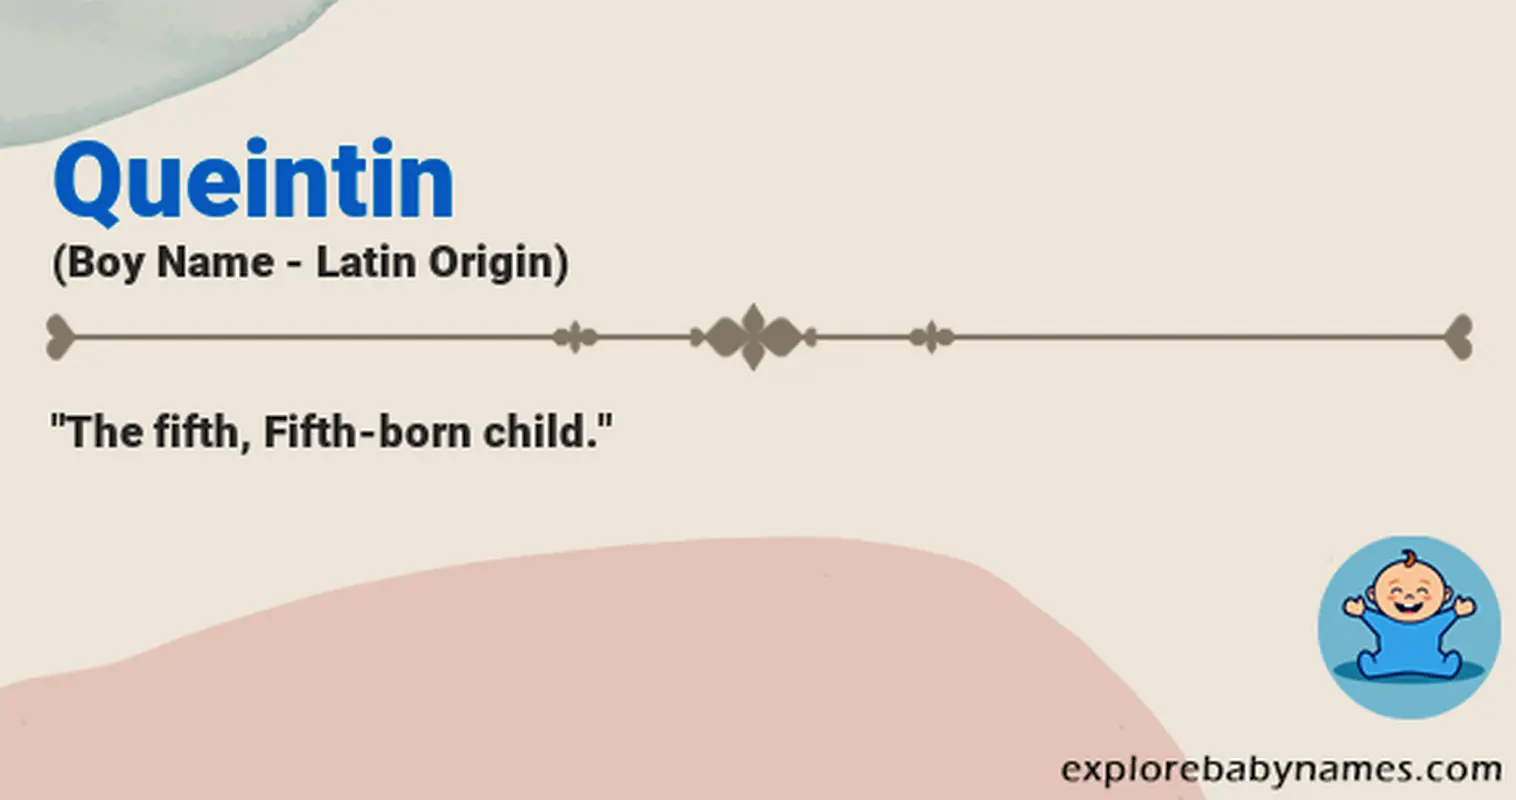 Meaning of Queintin